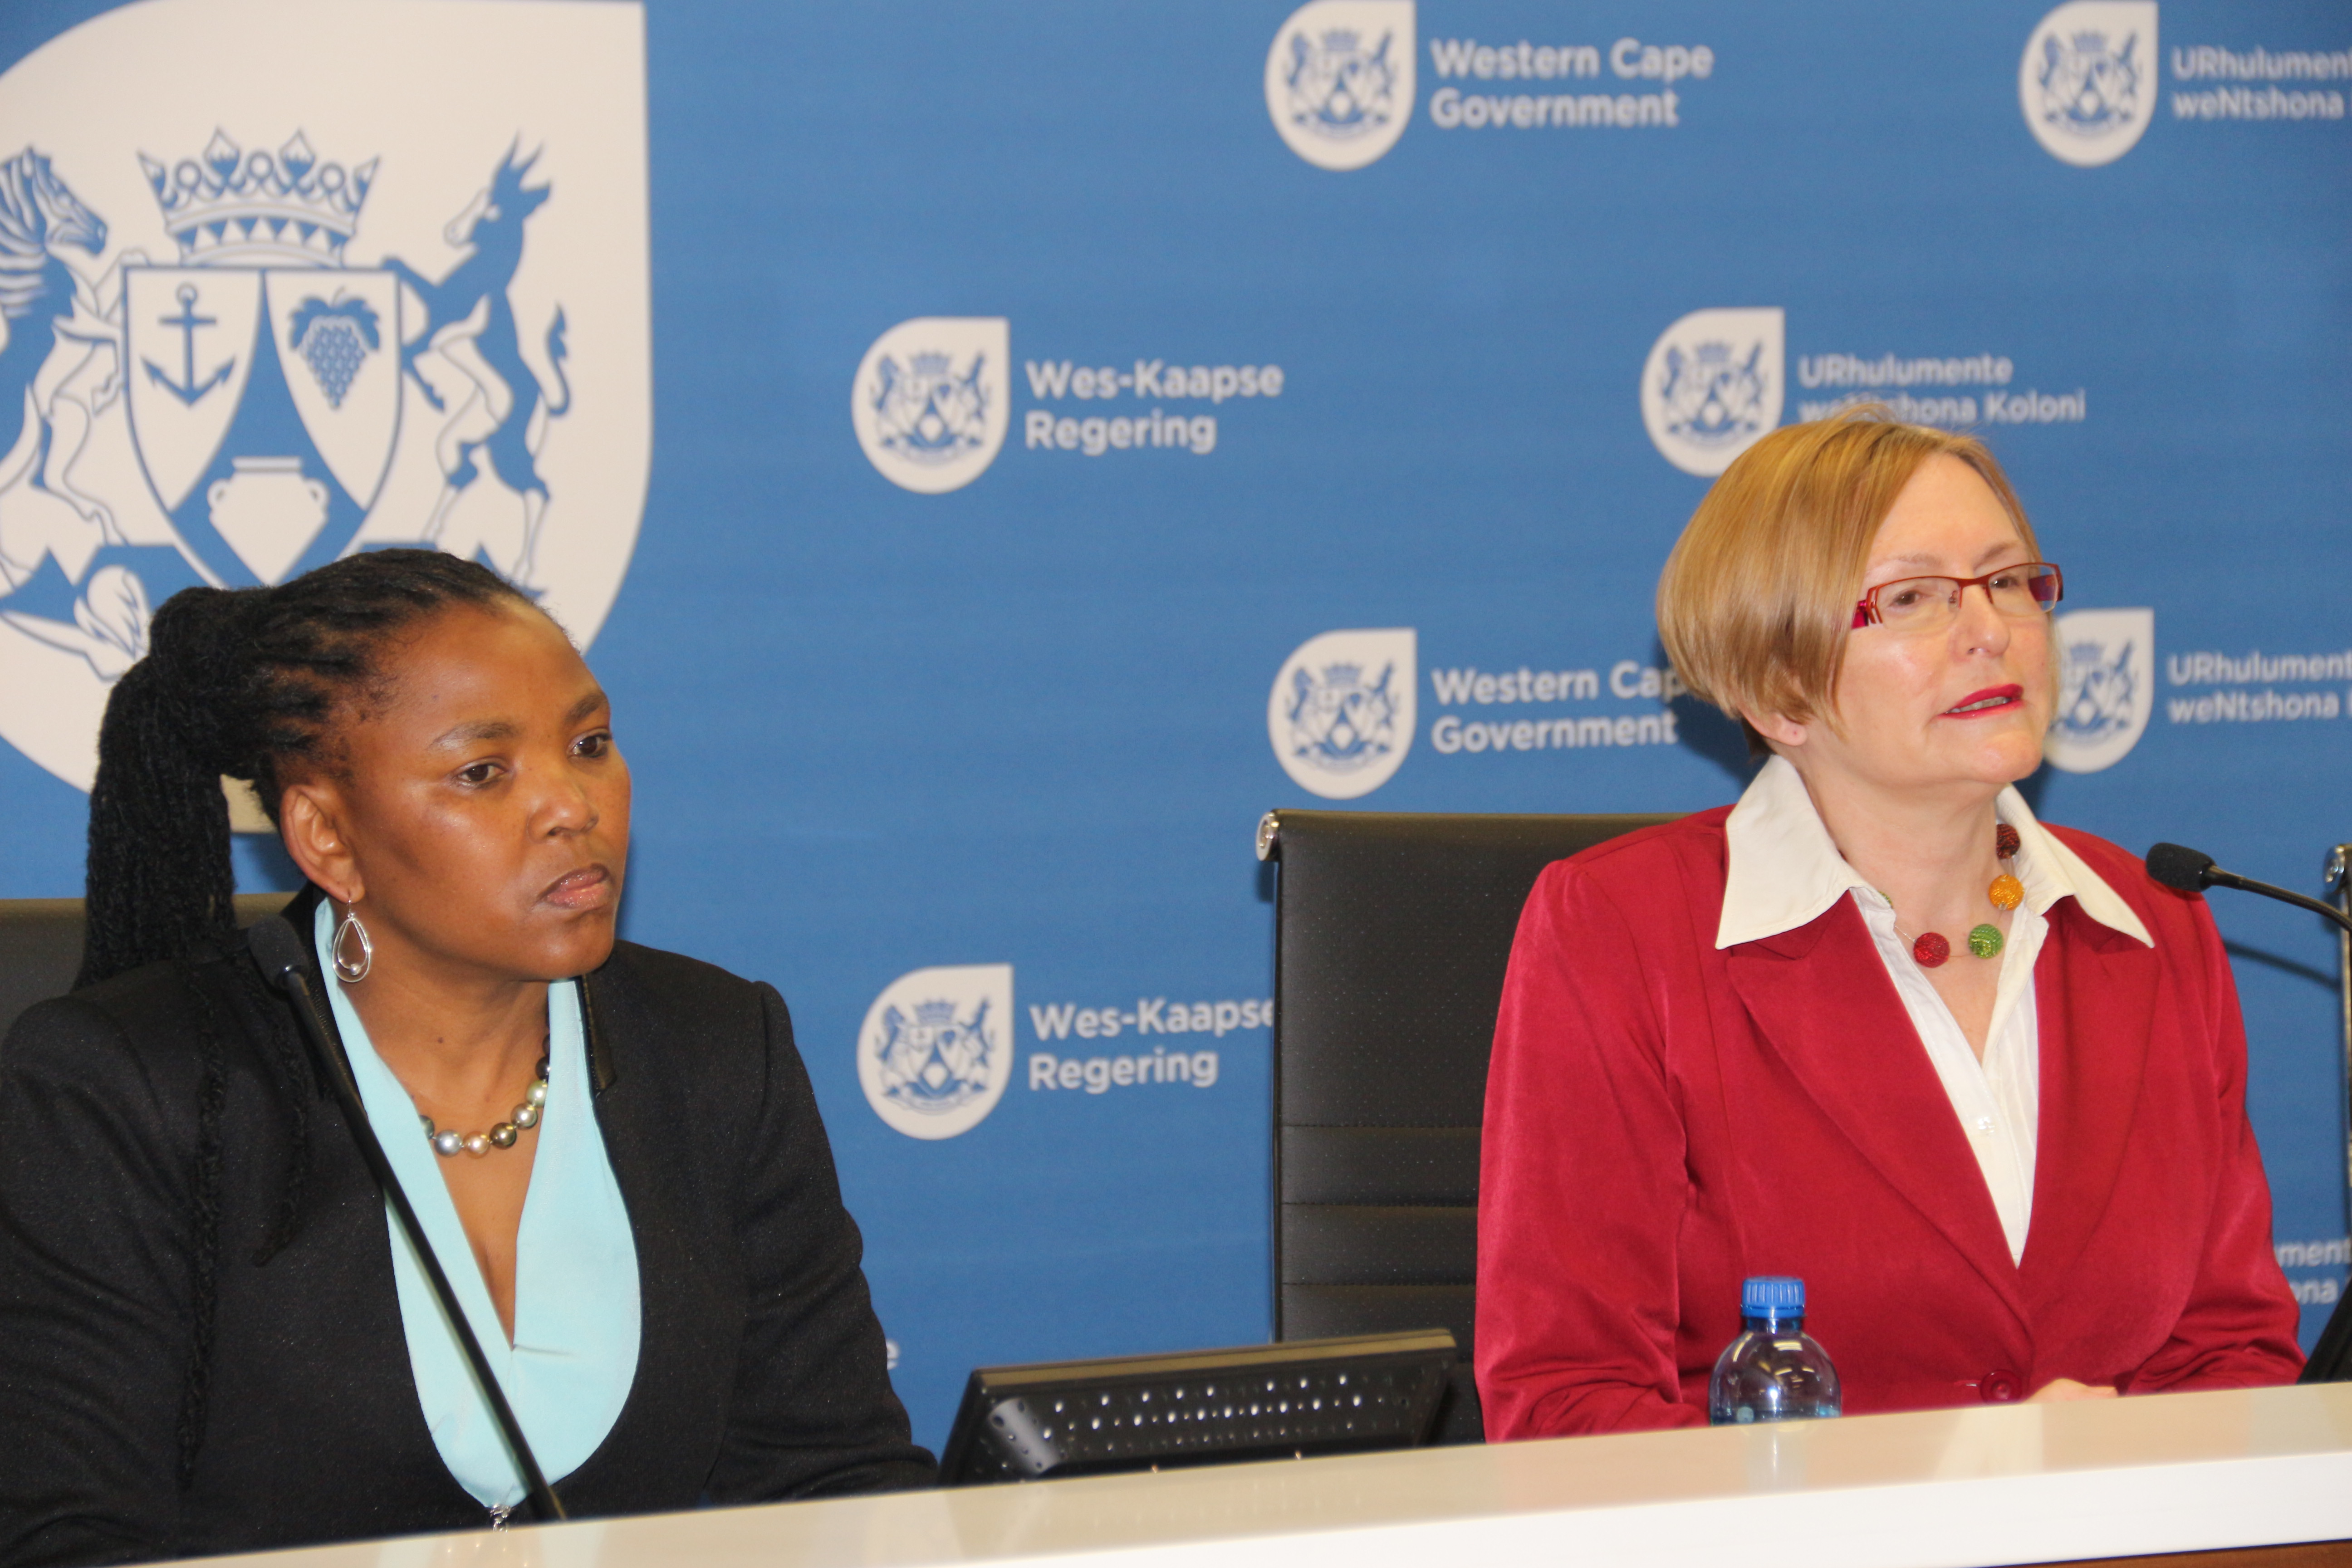 Minister Mbombo and Premier Zille at the launch of the Year Beyond programme